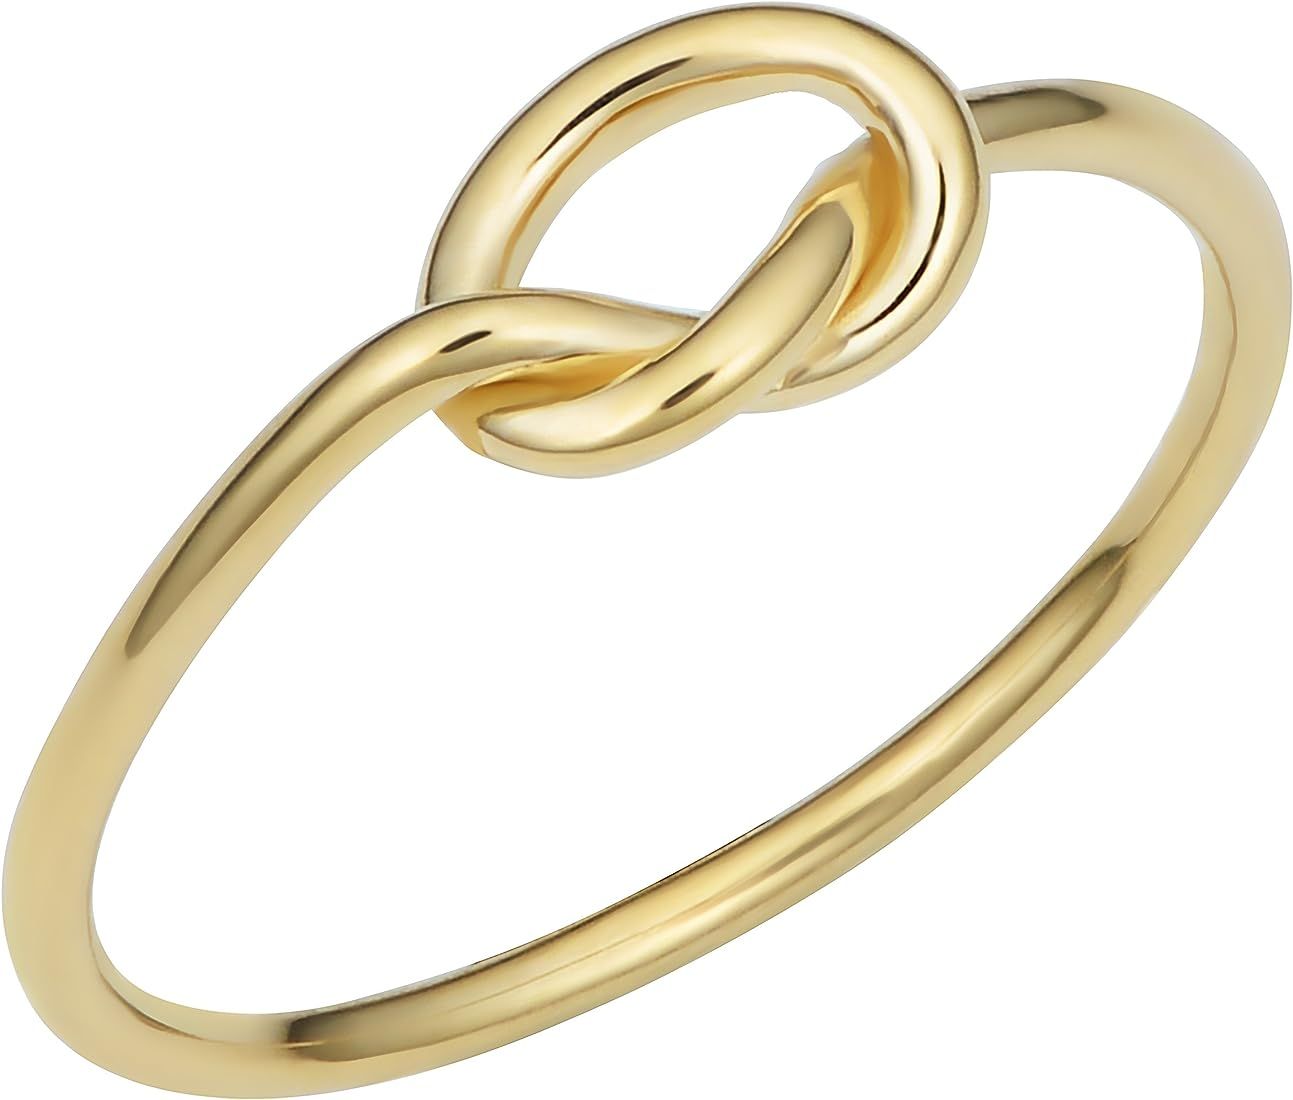 Kooljewelry 14k Gold Love Knot Ring (yellow gold, white gold or rose gold) | Amazon (US)